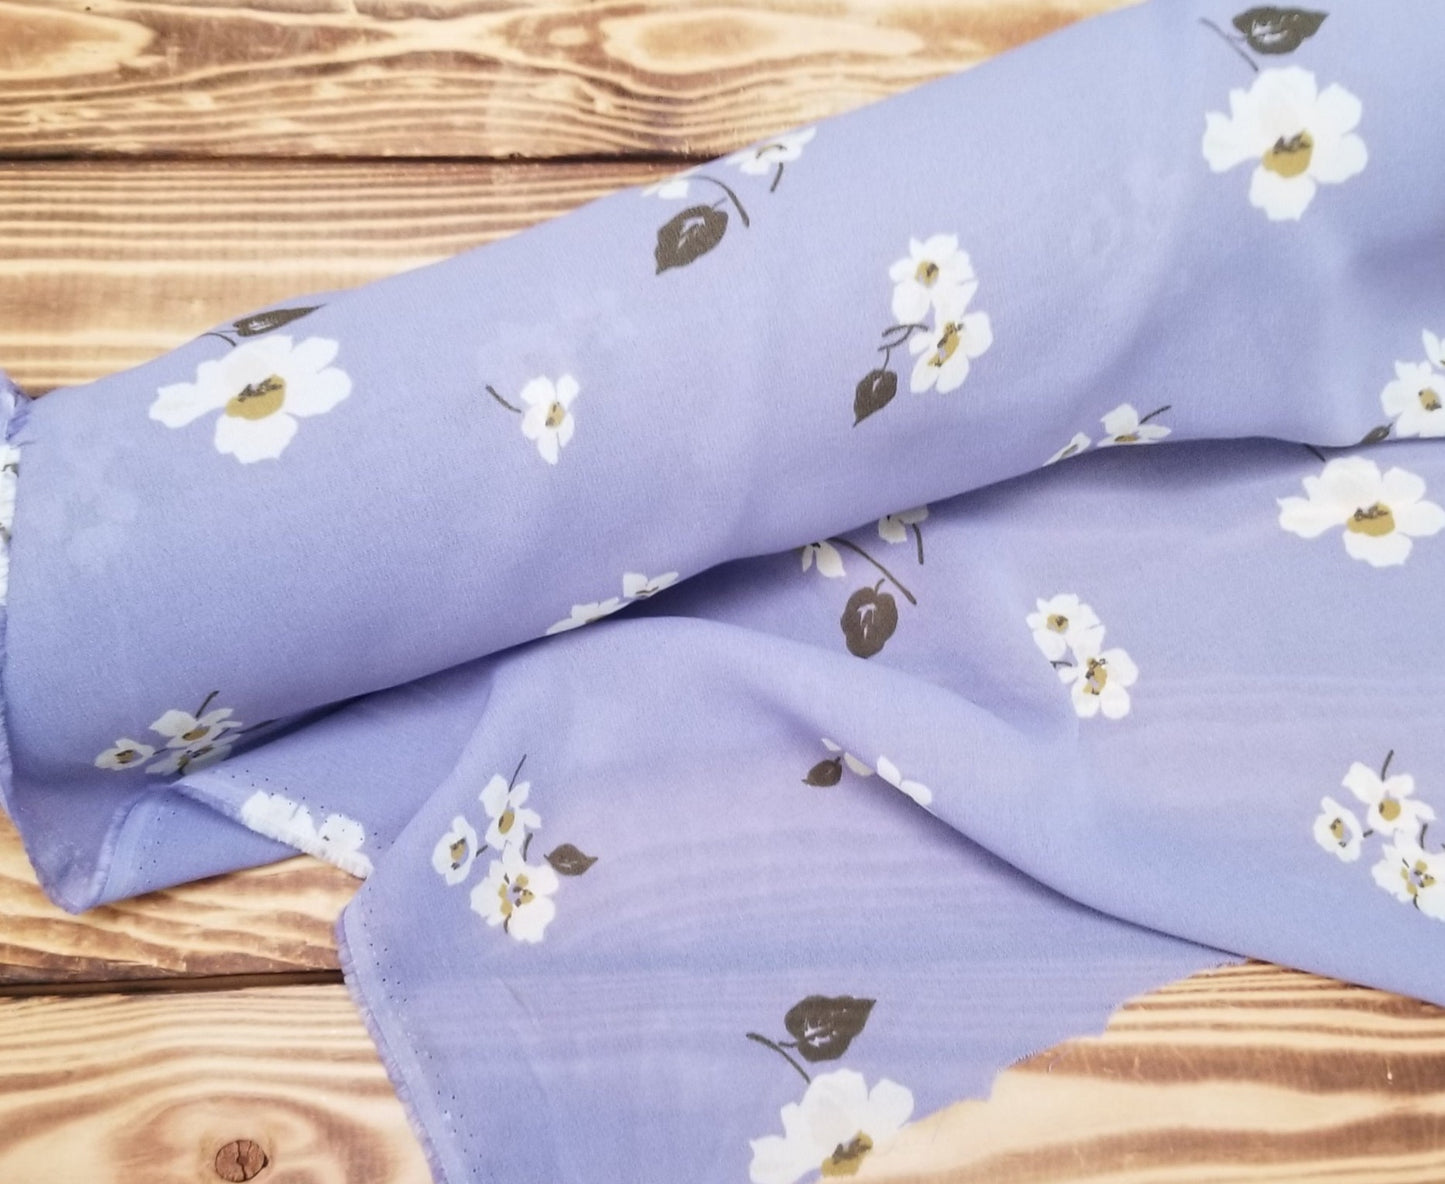 Designer Deadstock Rayon Georgette Sheer Lilac Daisy Floral Woven- By the yard